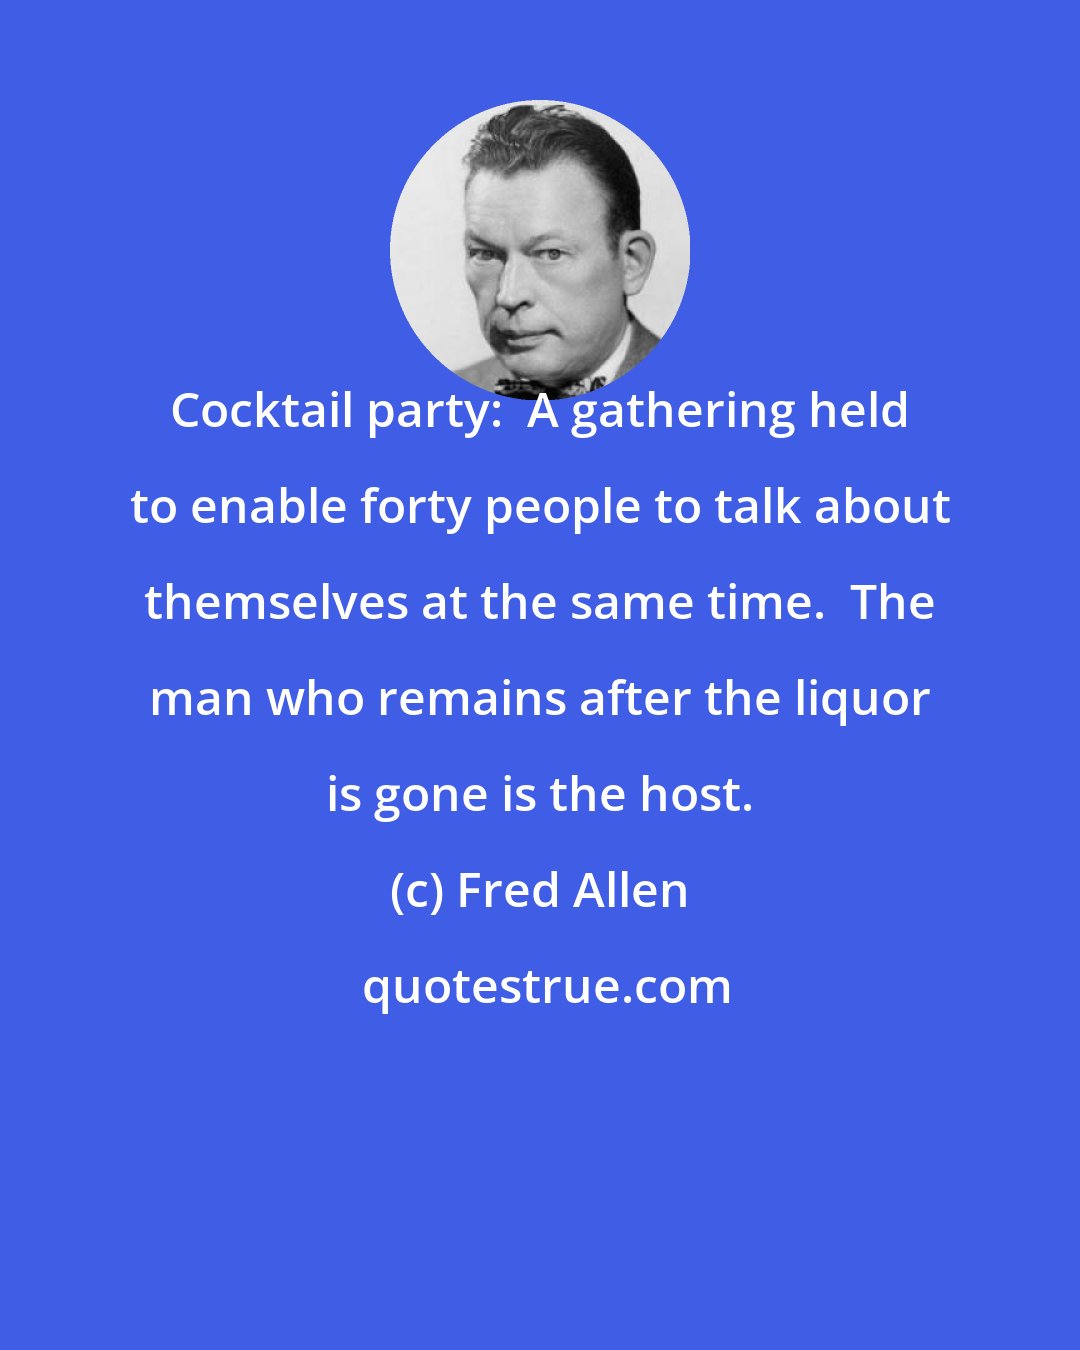 Fred Allen: Cocktail party:  A gathering held to enable forty people to talk about themselves at the same time.  The man who remains after the liquor is gone is the host.